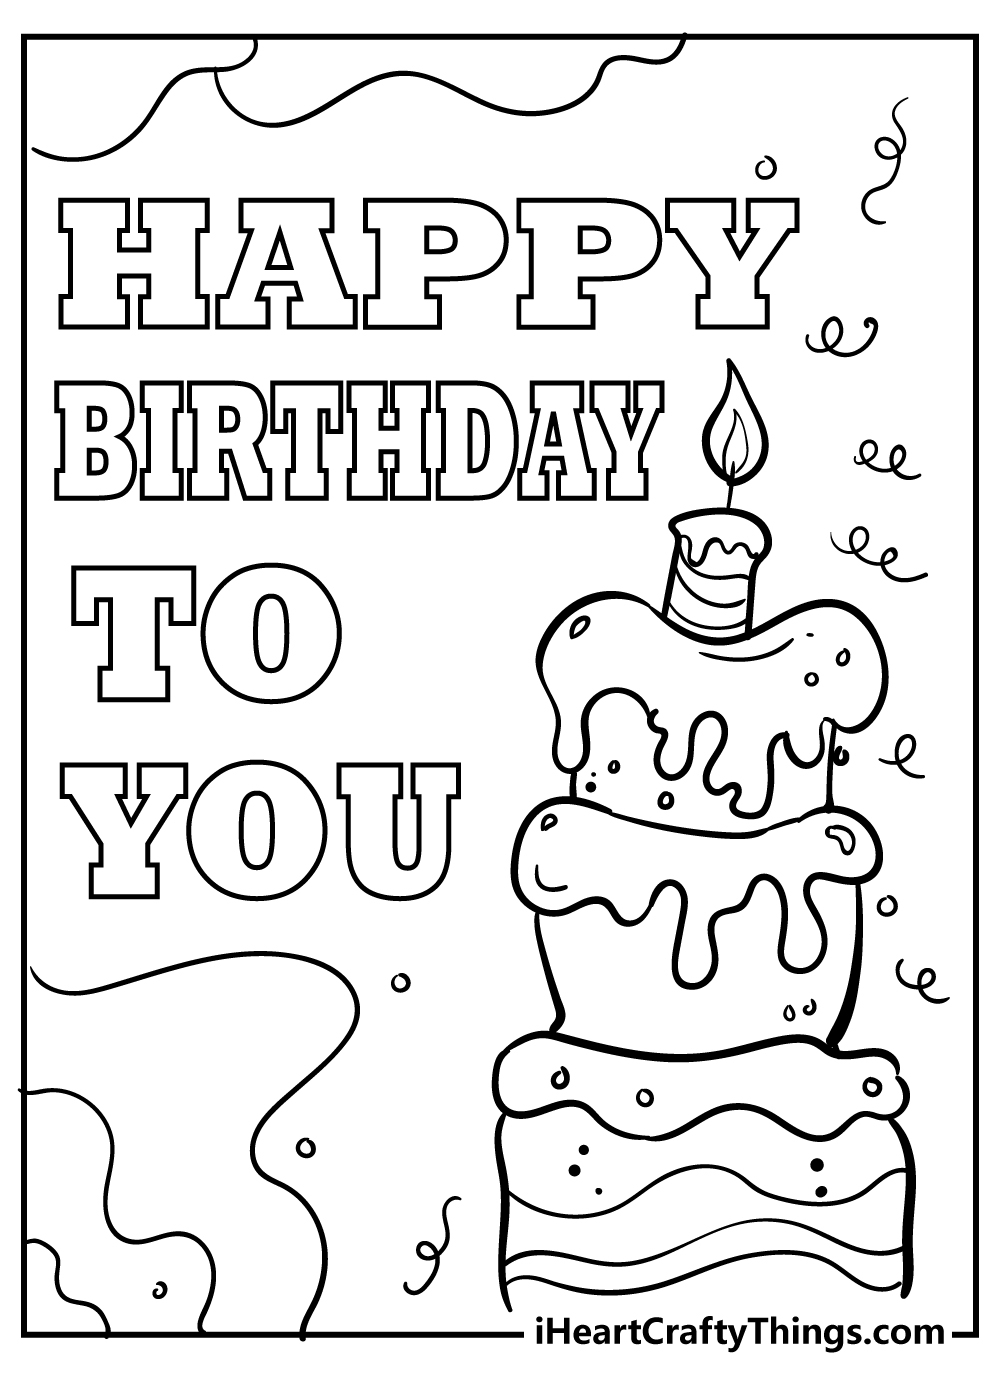 Happy Birthday Coloring Pages 100 Free Printables - Free Printable Birthday Cards To Color